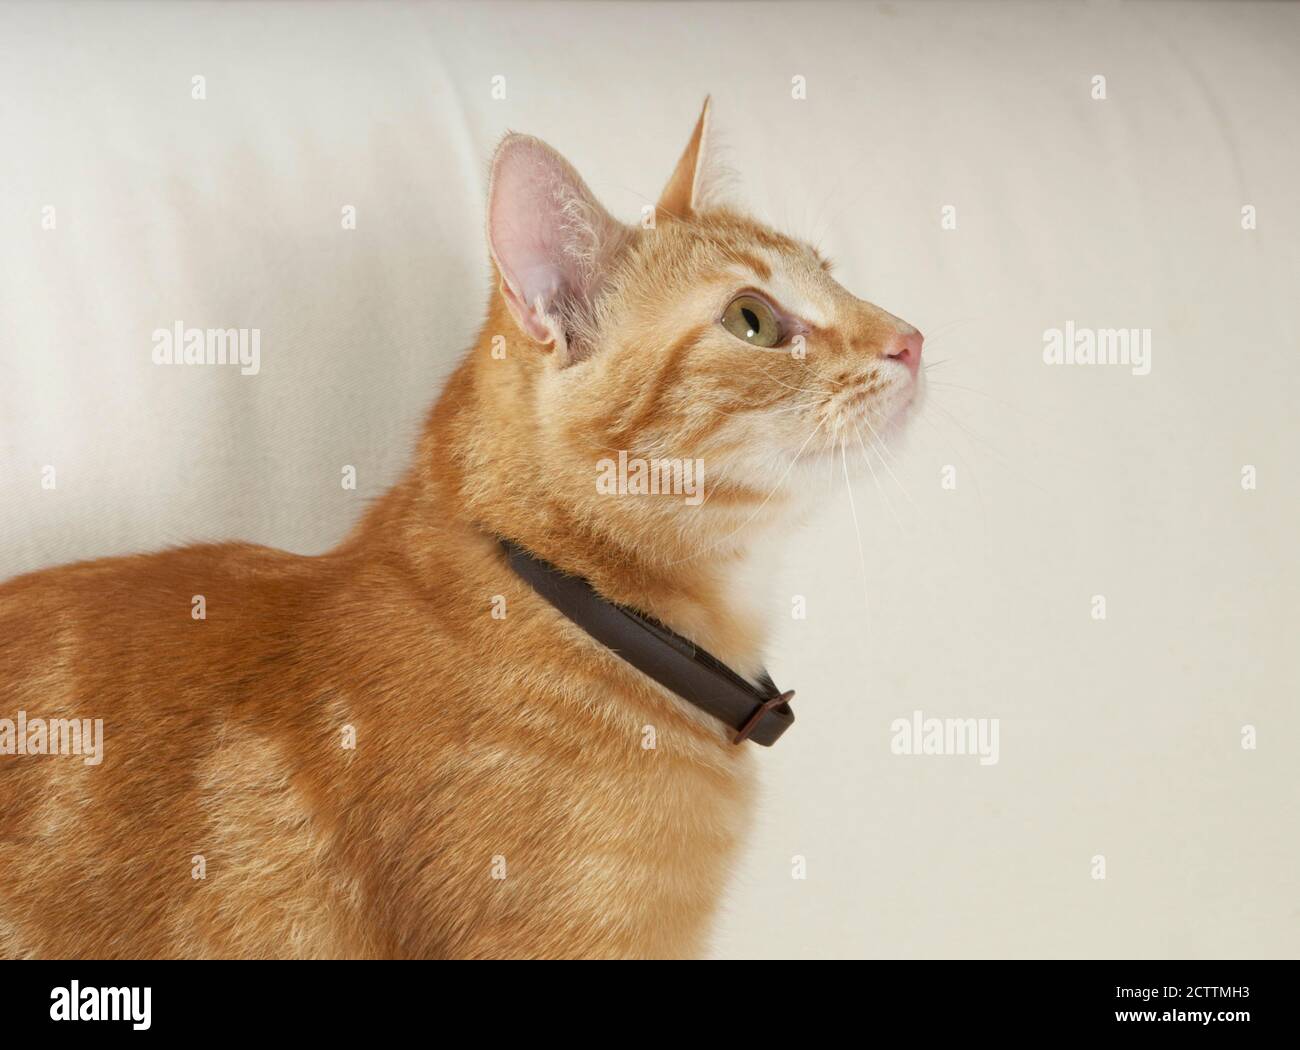 Domestic cat. Red tabby adult wearing a flea collar. Stock Photo